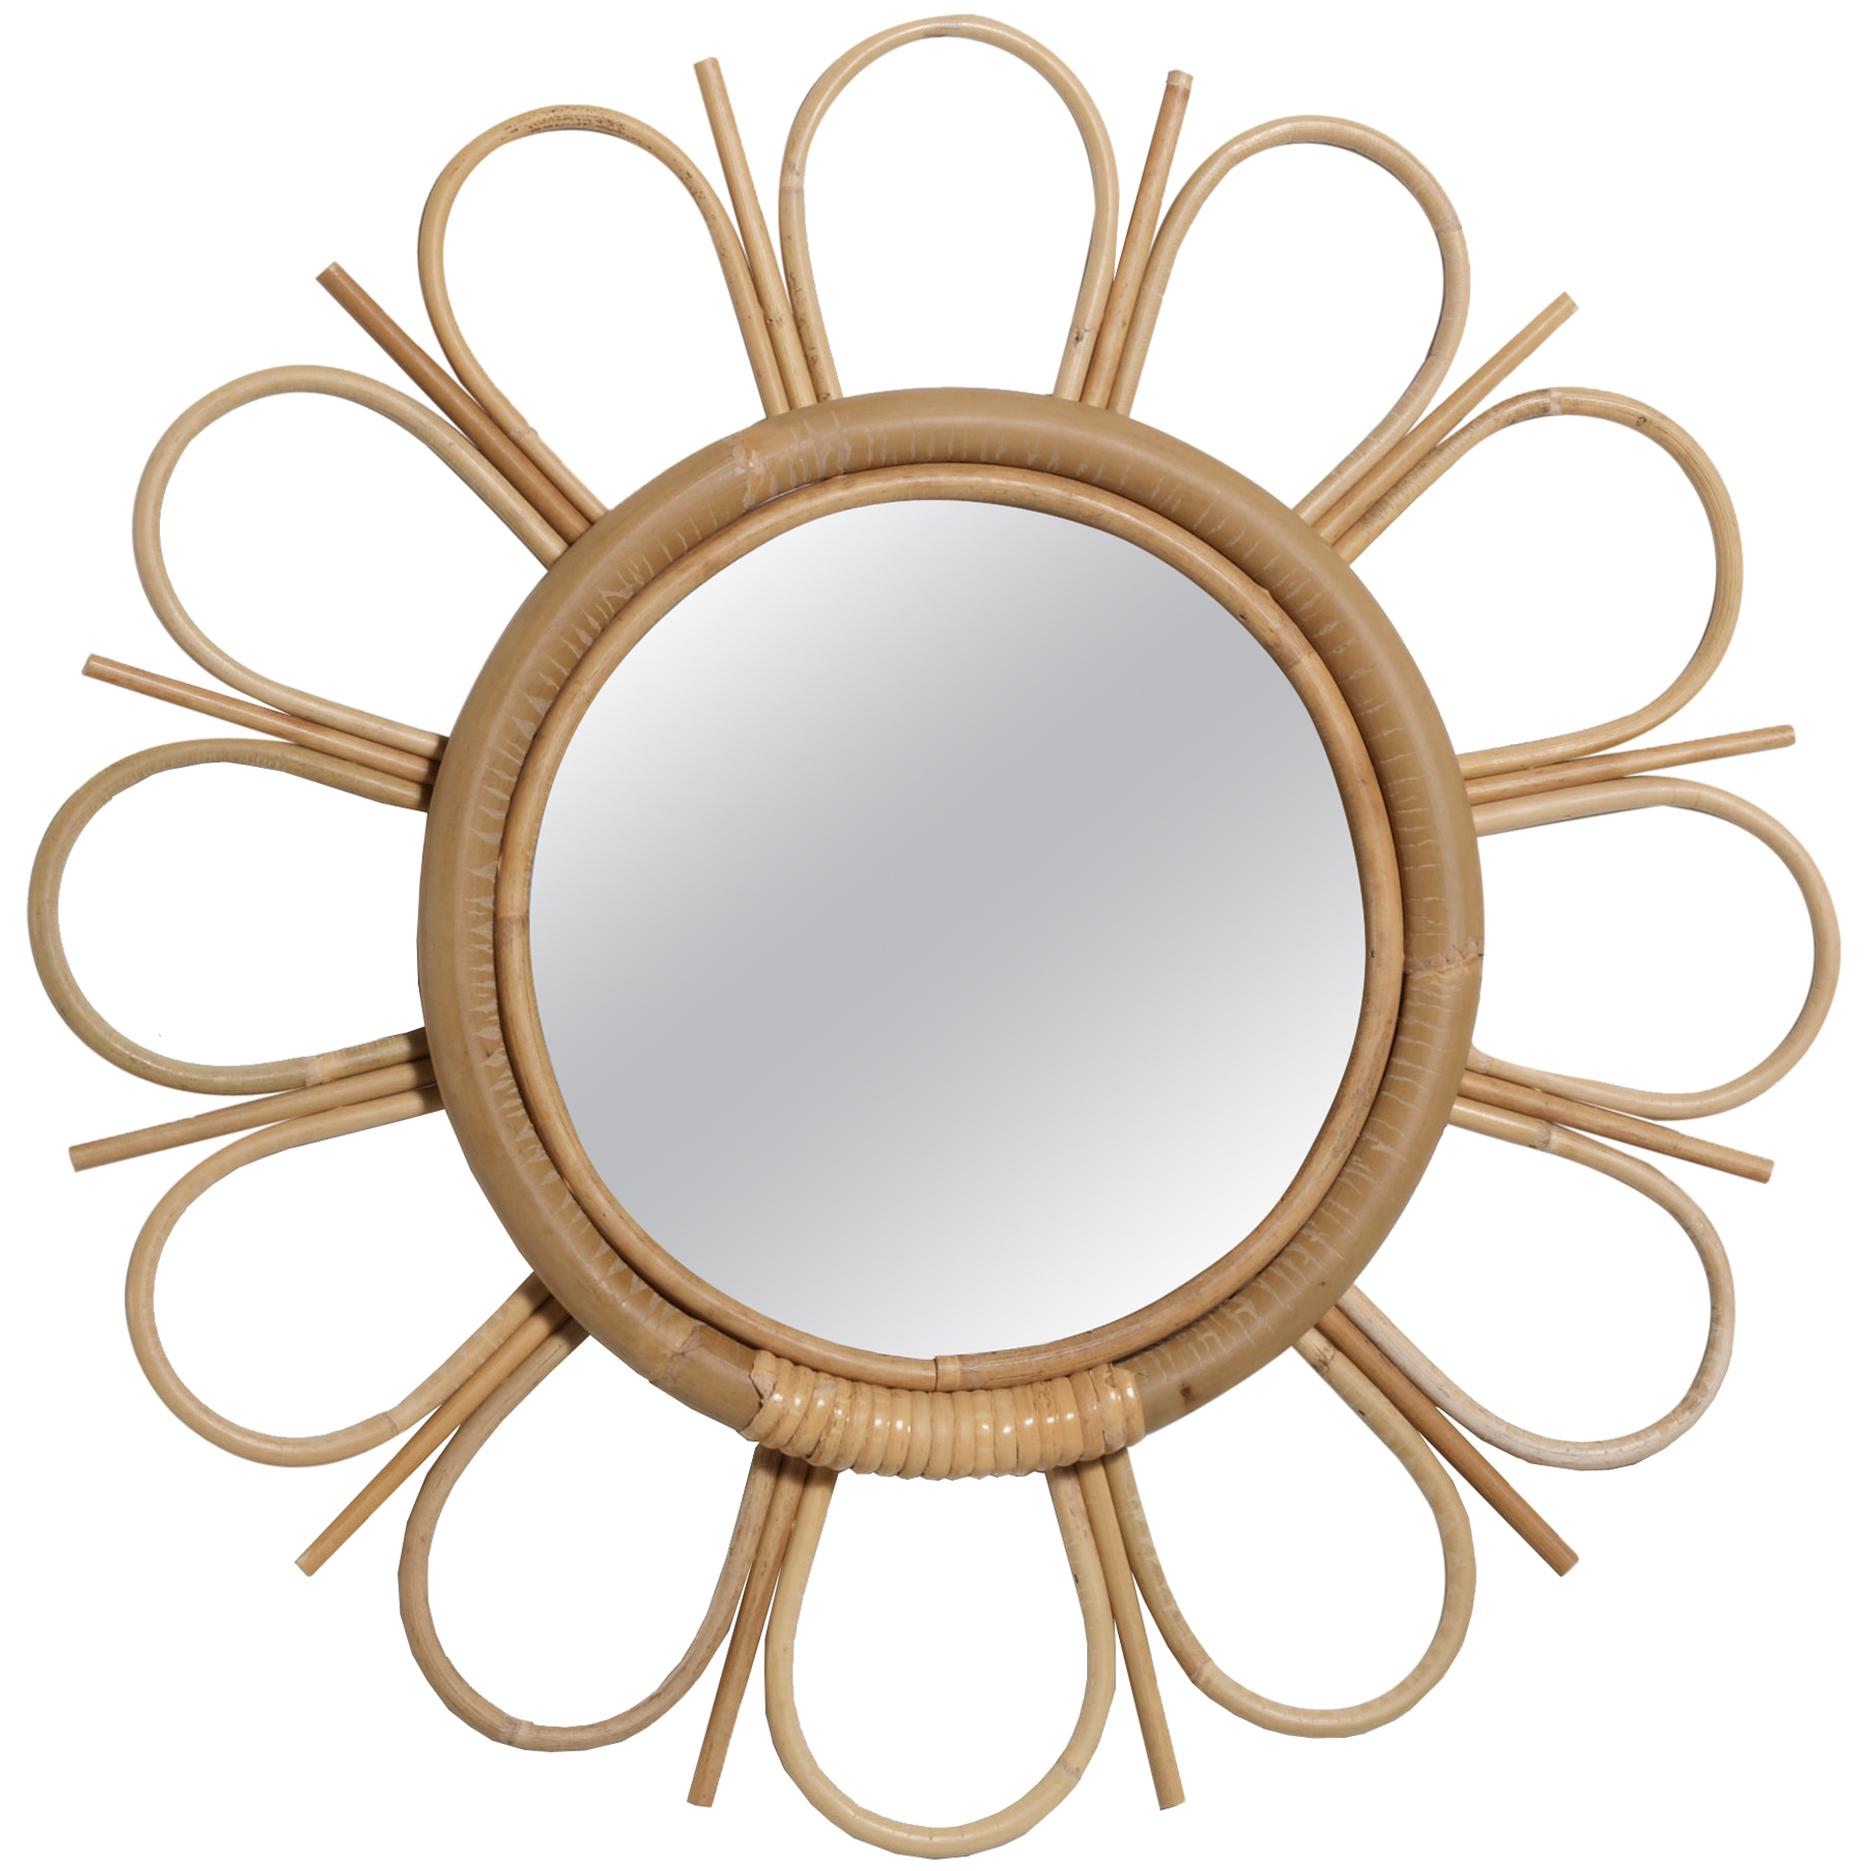 Ramona Mirror in Natural Glass by CuratedKravet